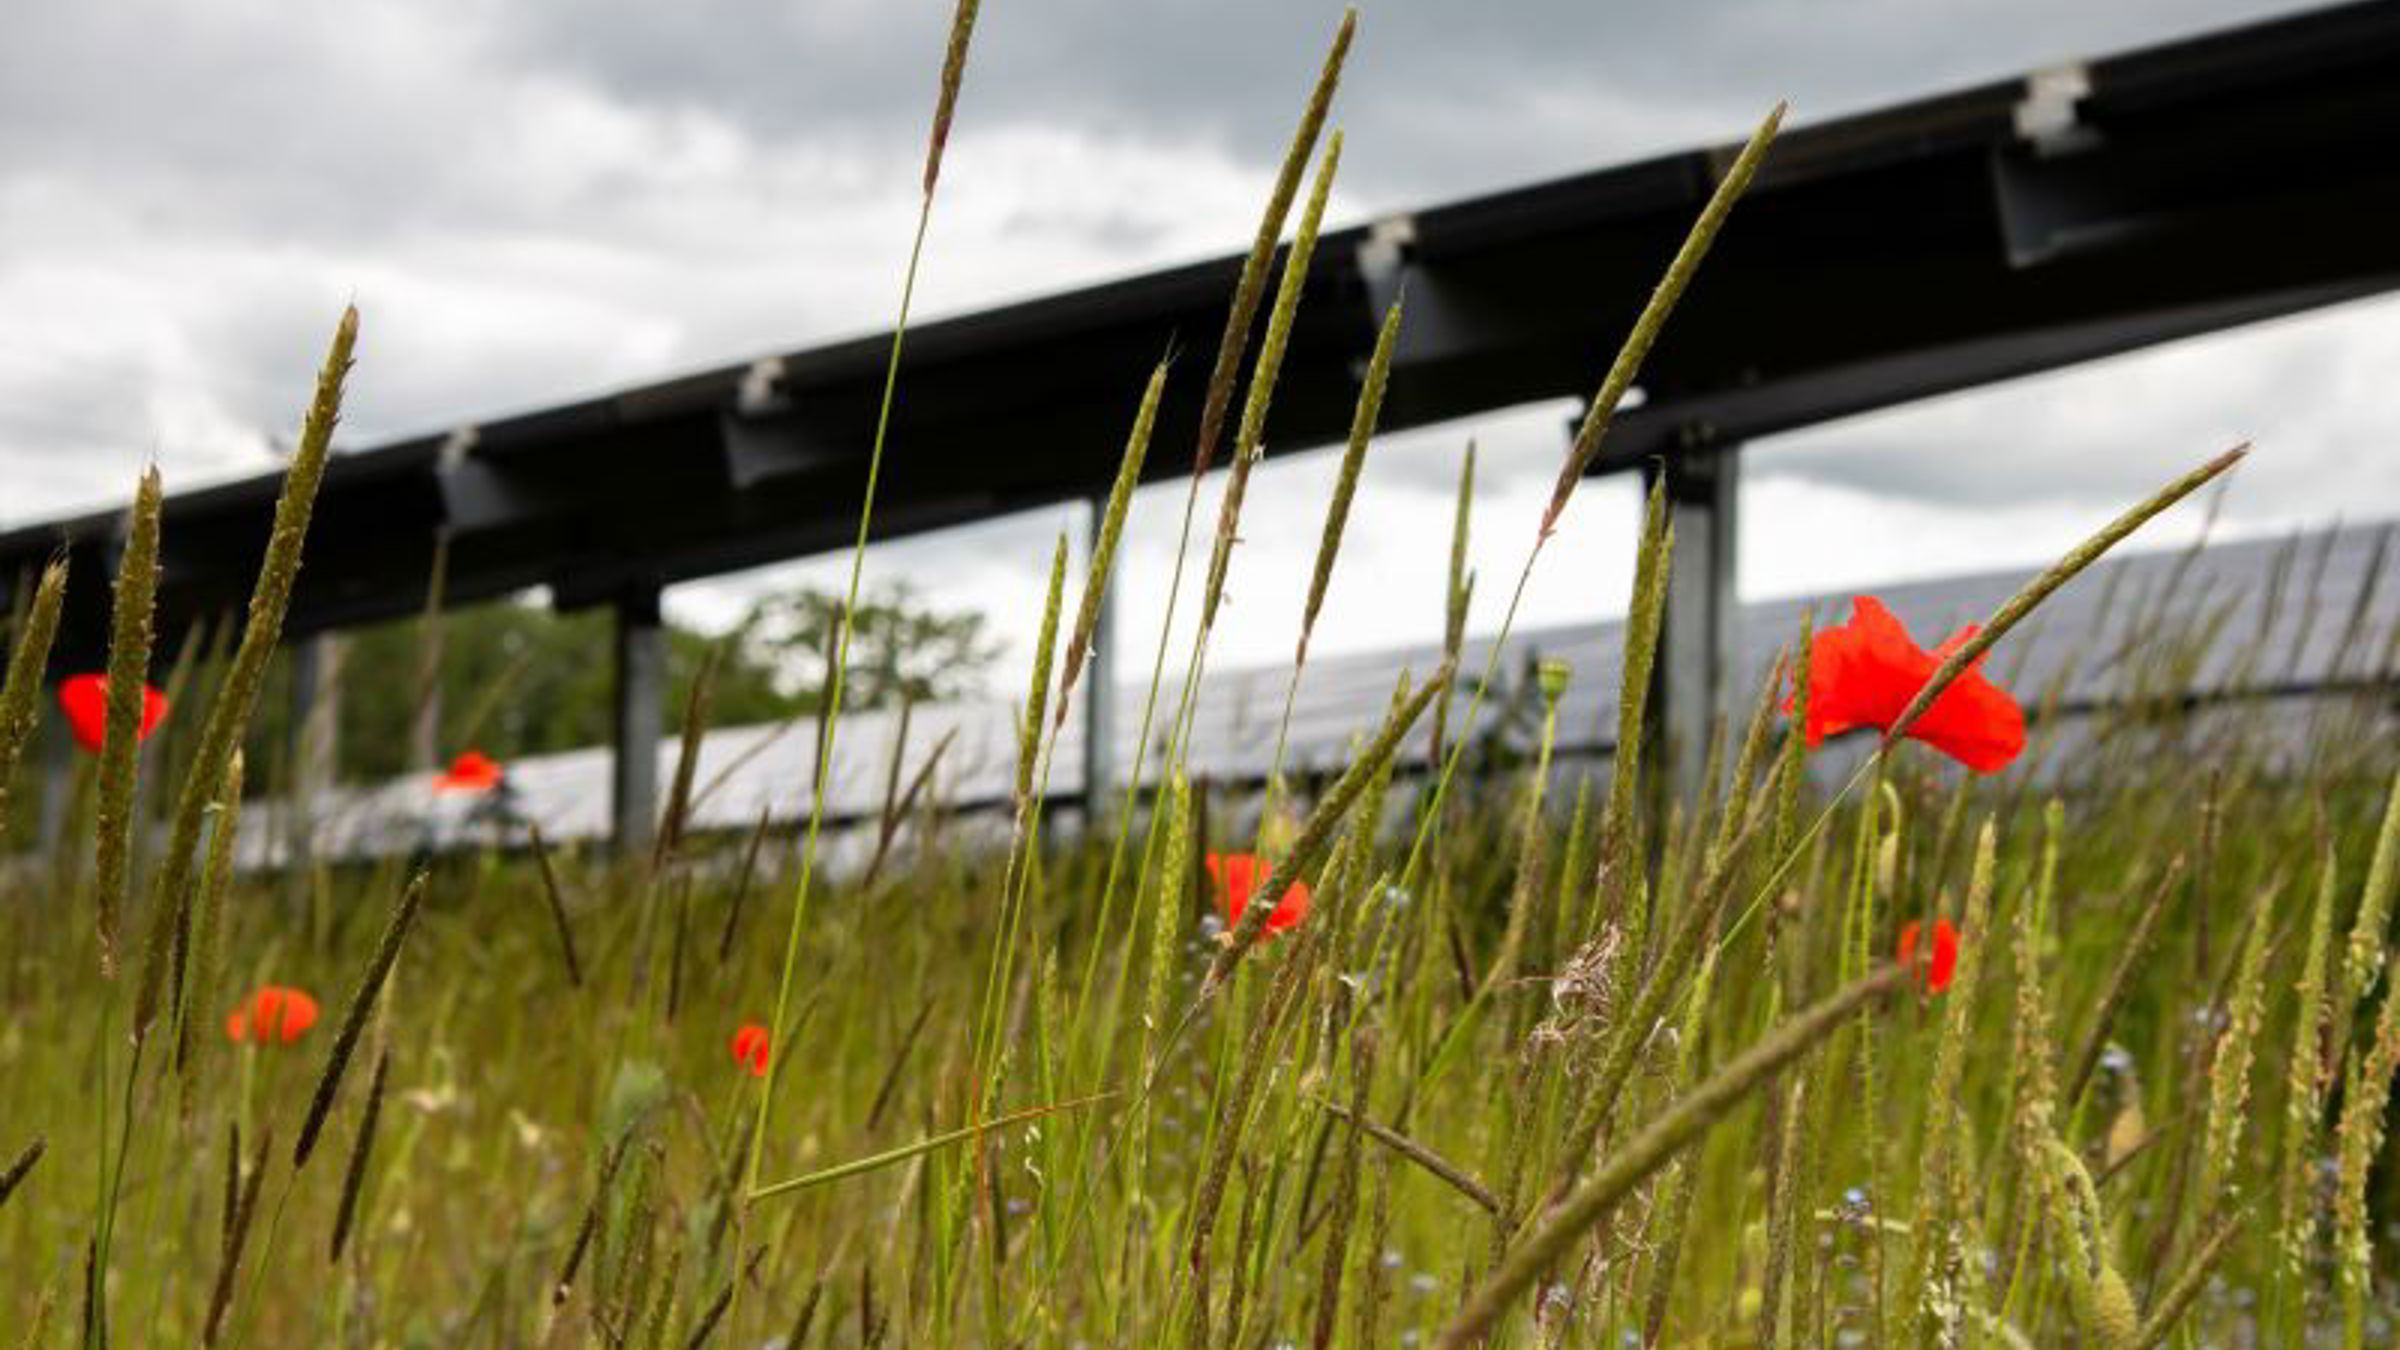 Solar panels on grass on a cloudy day with poppy flowers